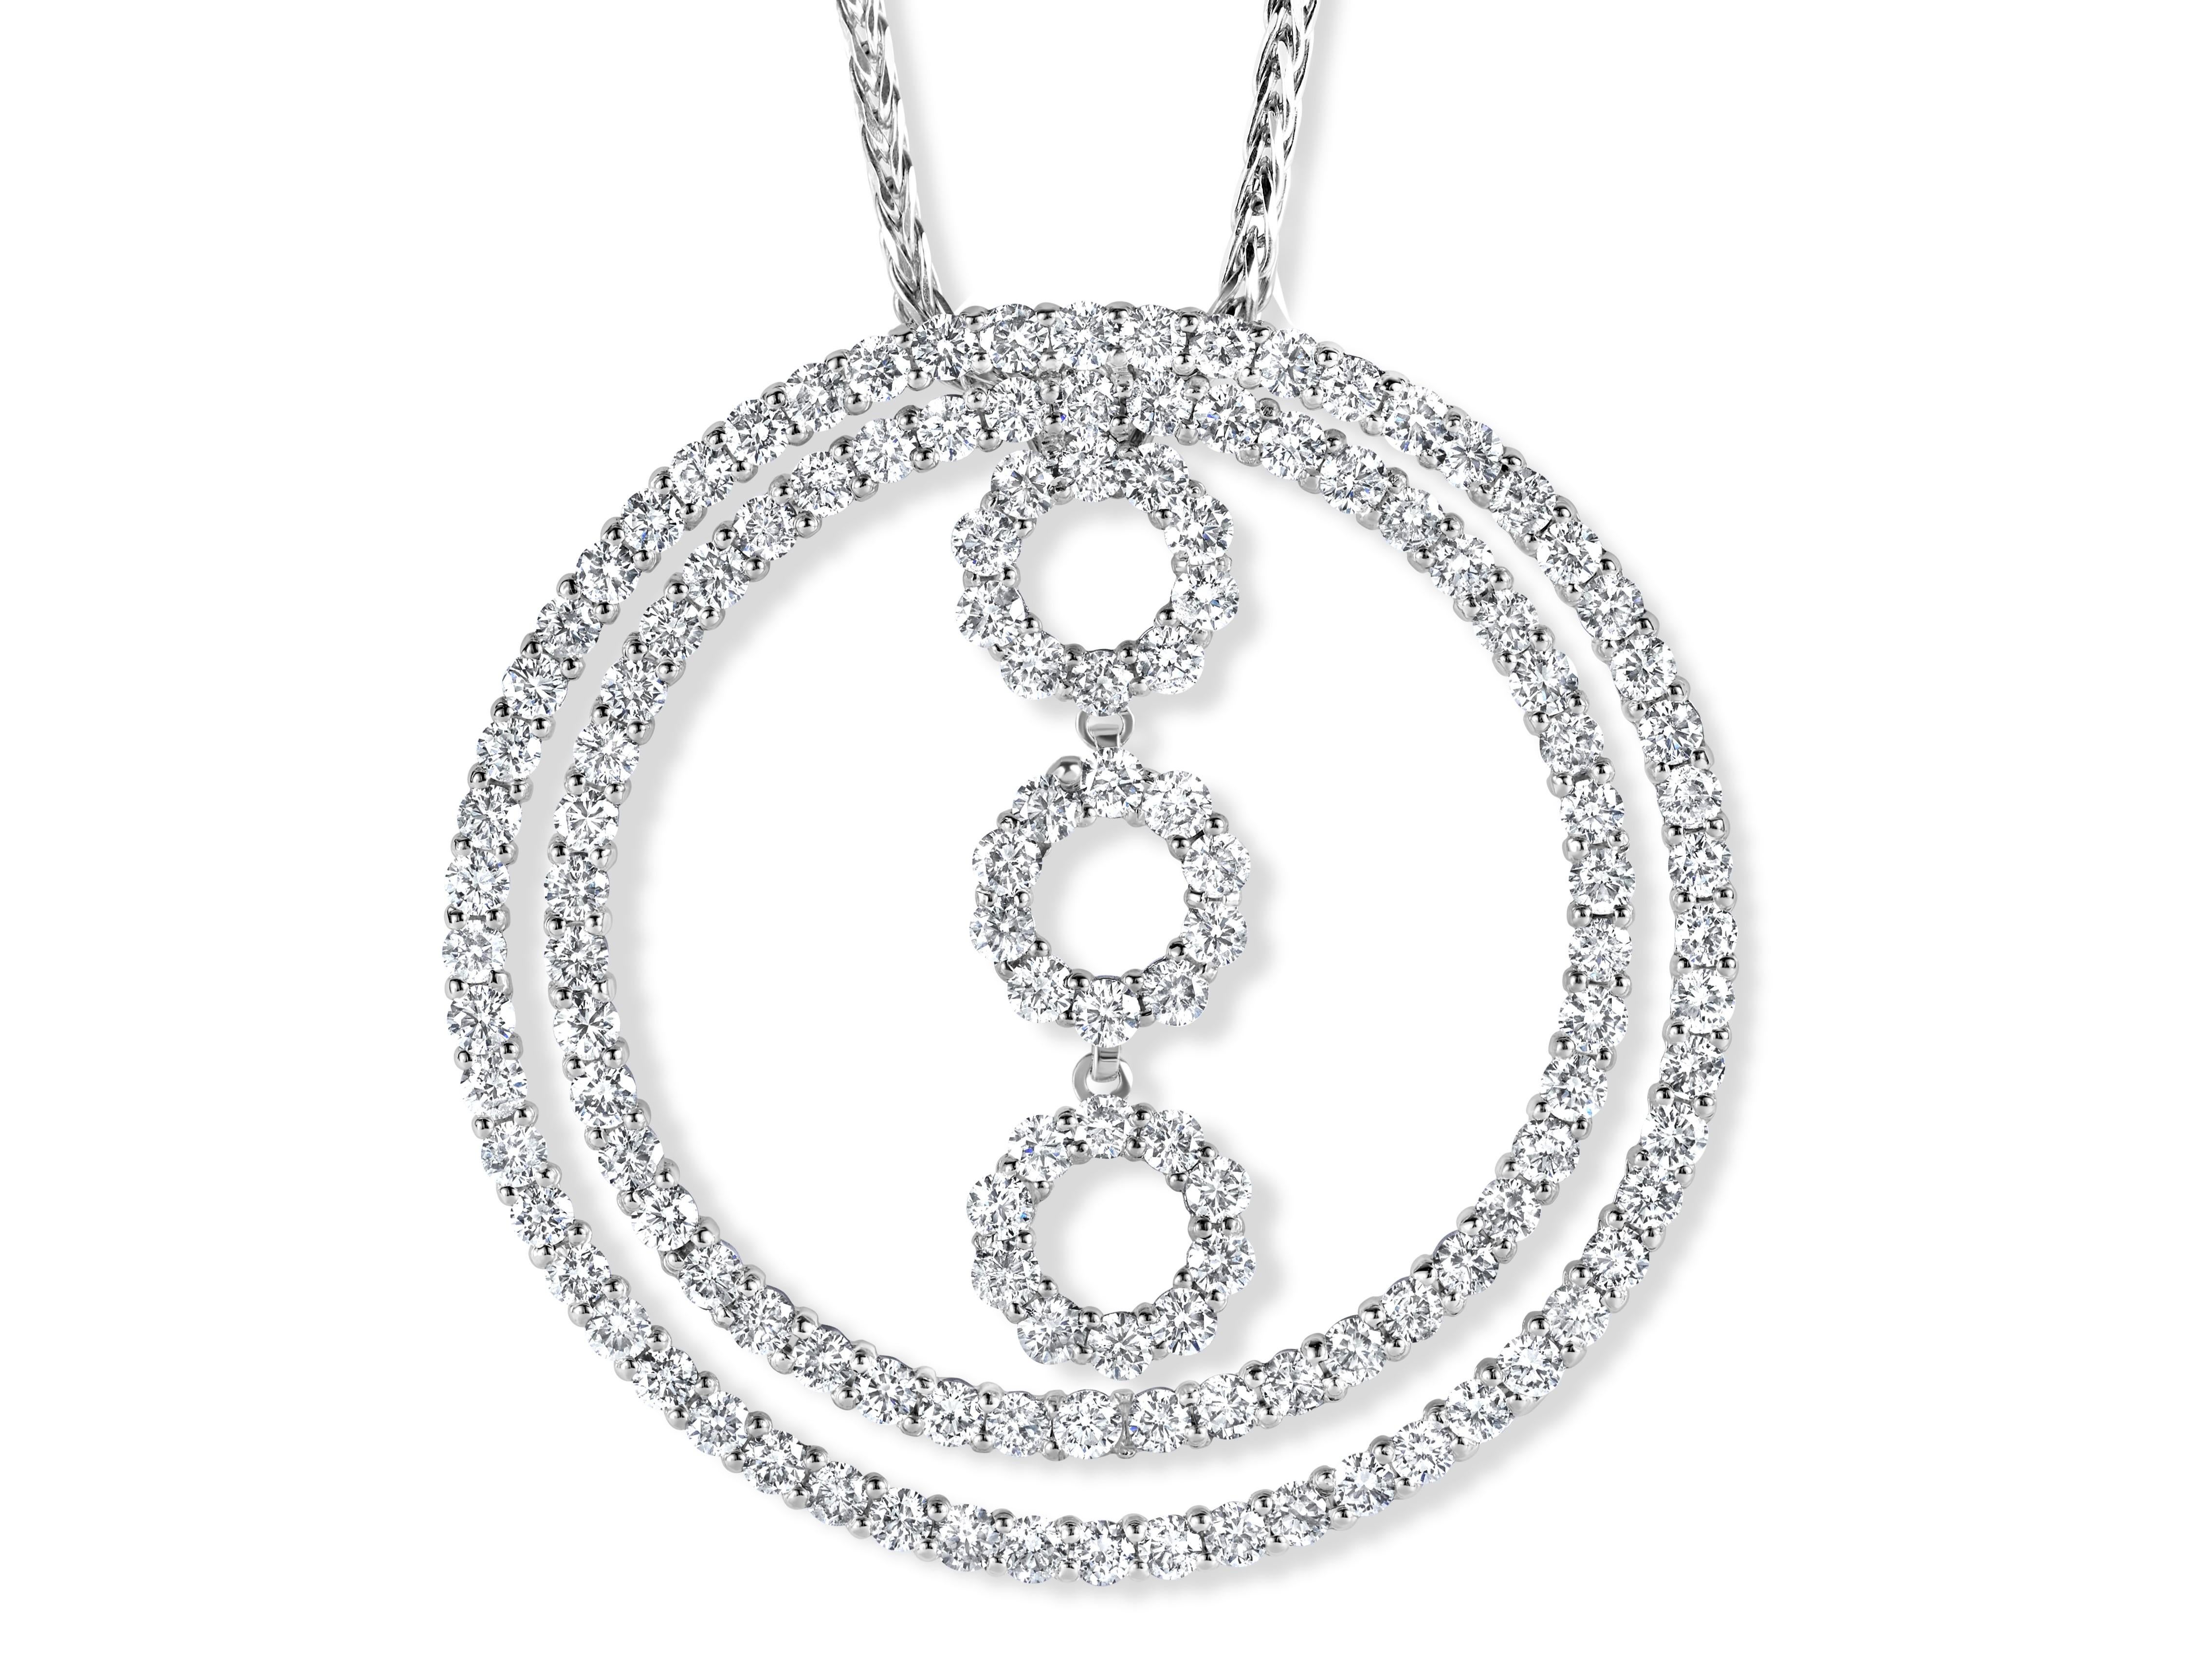 Stunning 18kt White Gold 6.73ct. Diamond Pendant With a Thick chain

Diamonds: Brilliant cut together approx. 6.73 ct.

Material: 18kt White gold

Measurements: Diameter pendant 48.0 mm, Chain is 42 cm long

Total weight: 21.0 gram / 0.740 oz / 13.5